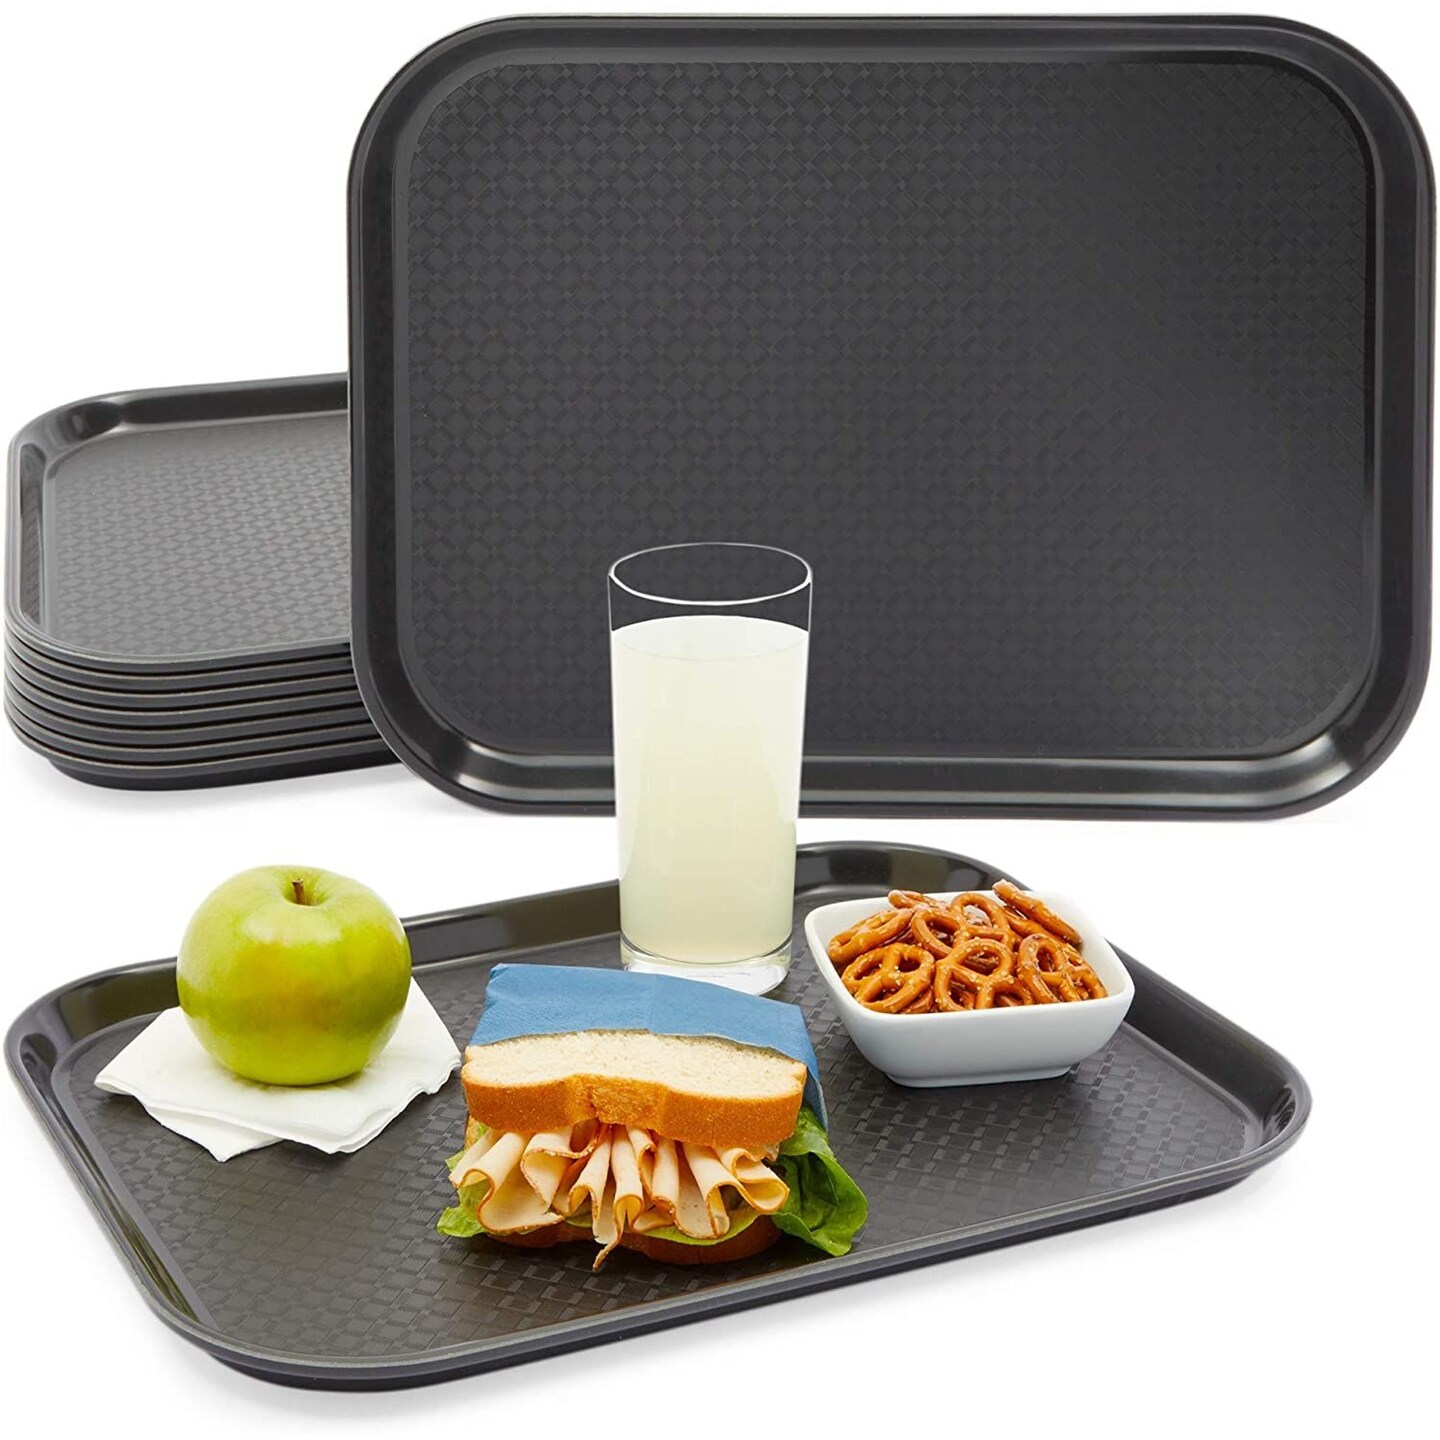 8 Pack Plastic Nonslip Serving Tray for Cafeteria, School Lunch